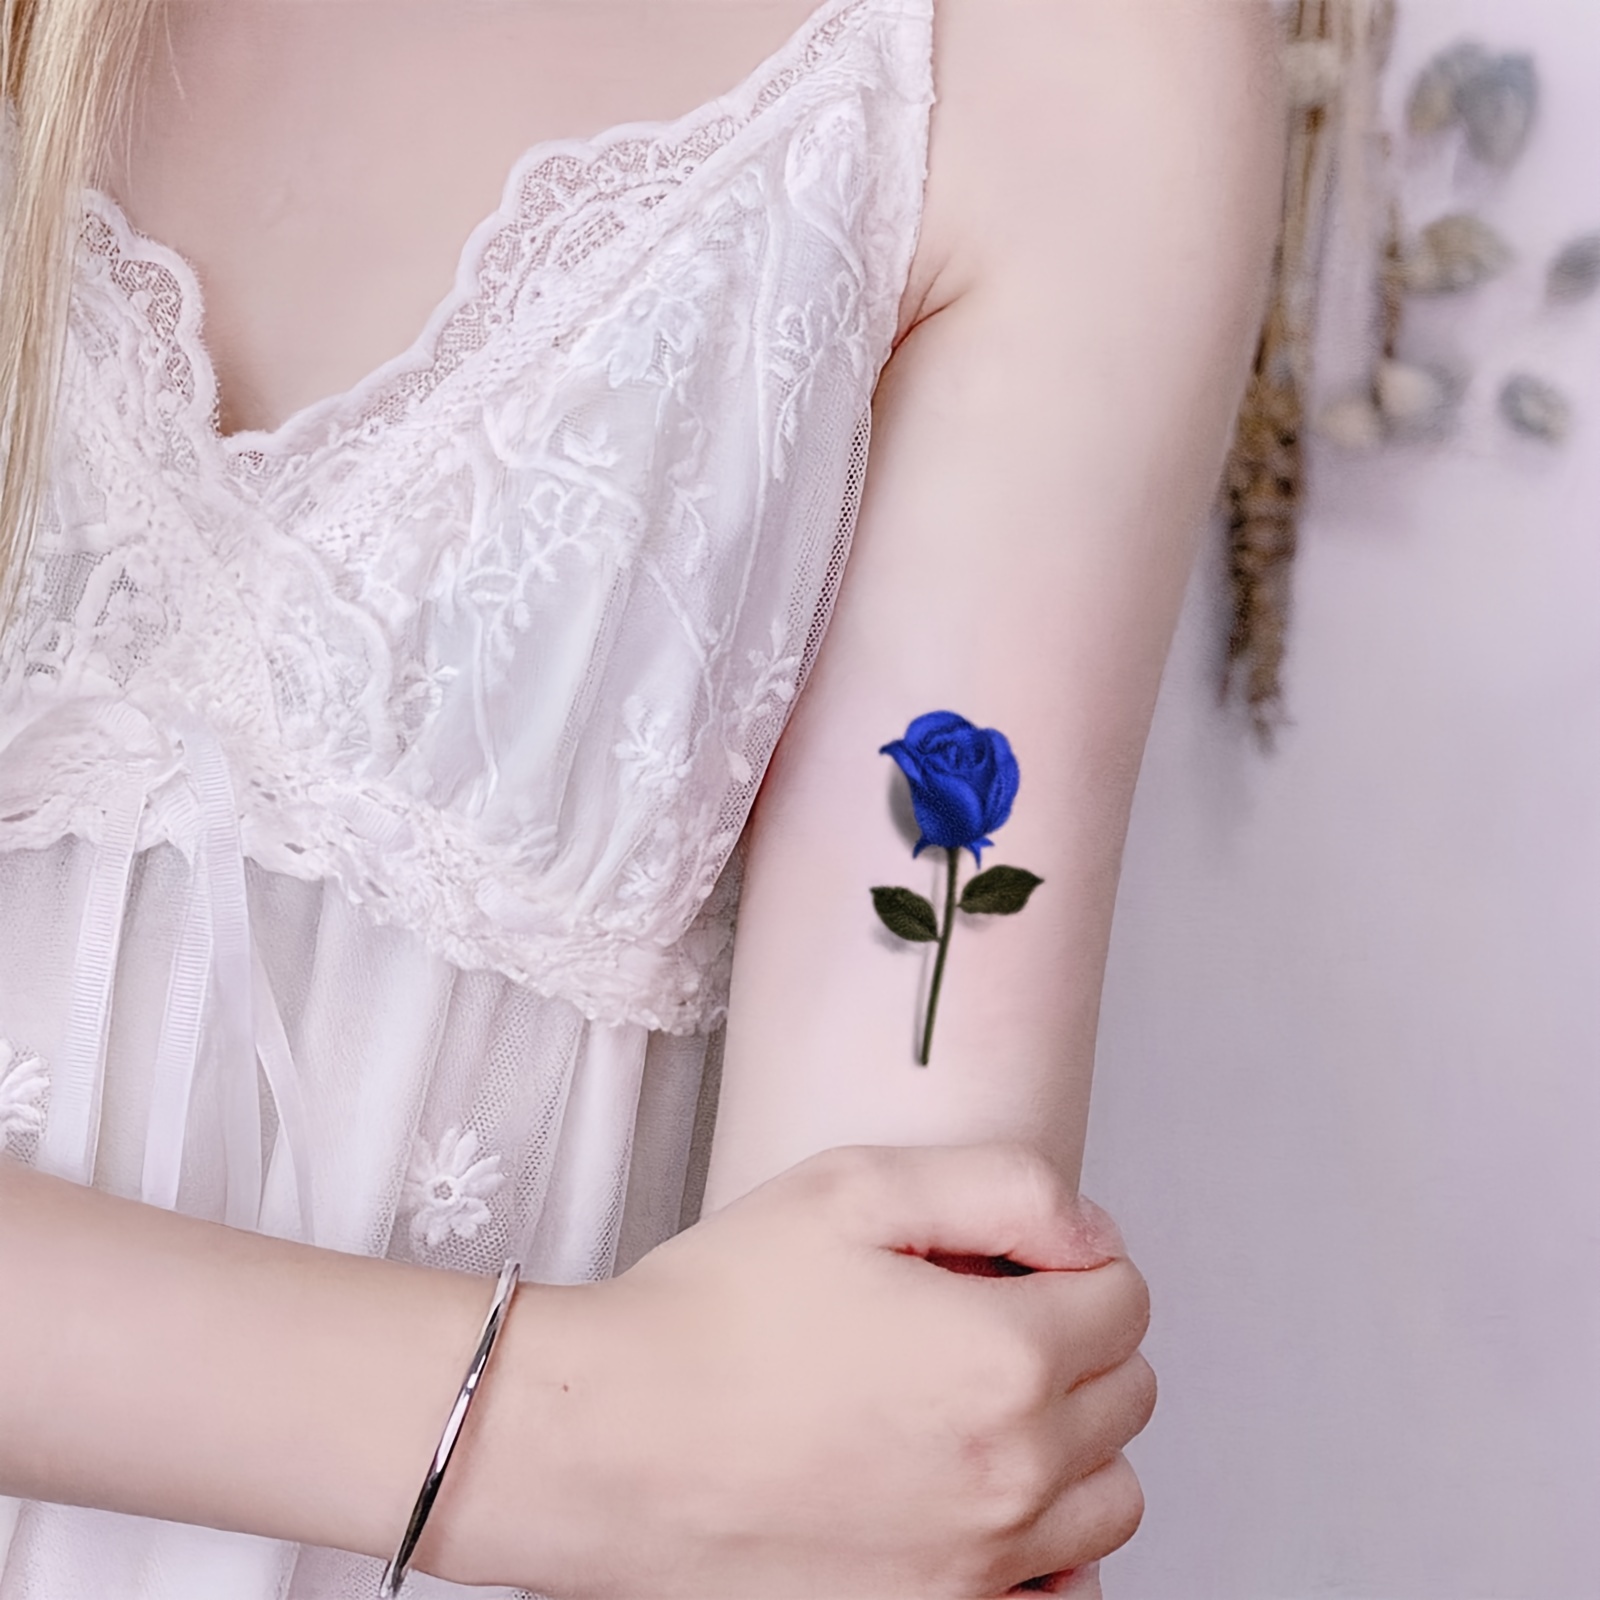 40 Fantastic Blue Rose Tattoo Design with Meaning [202 Ideas]